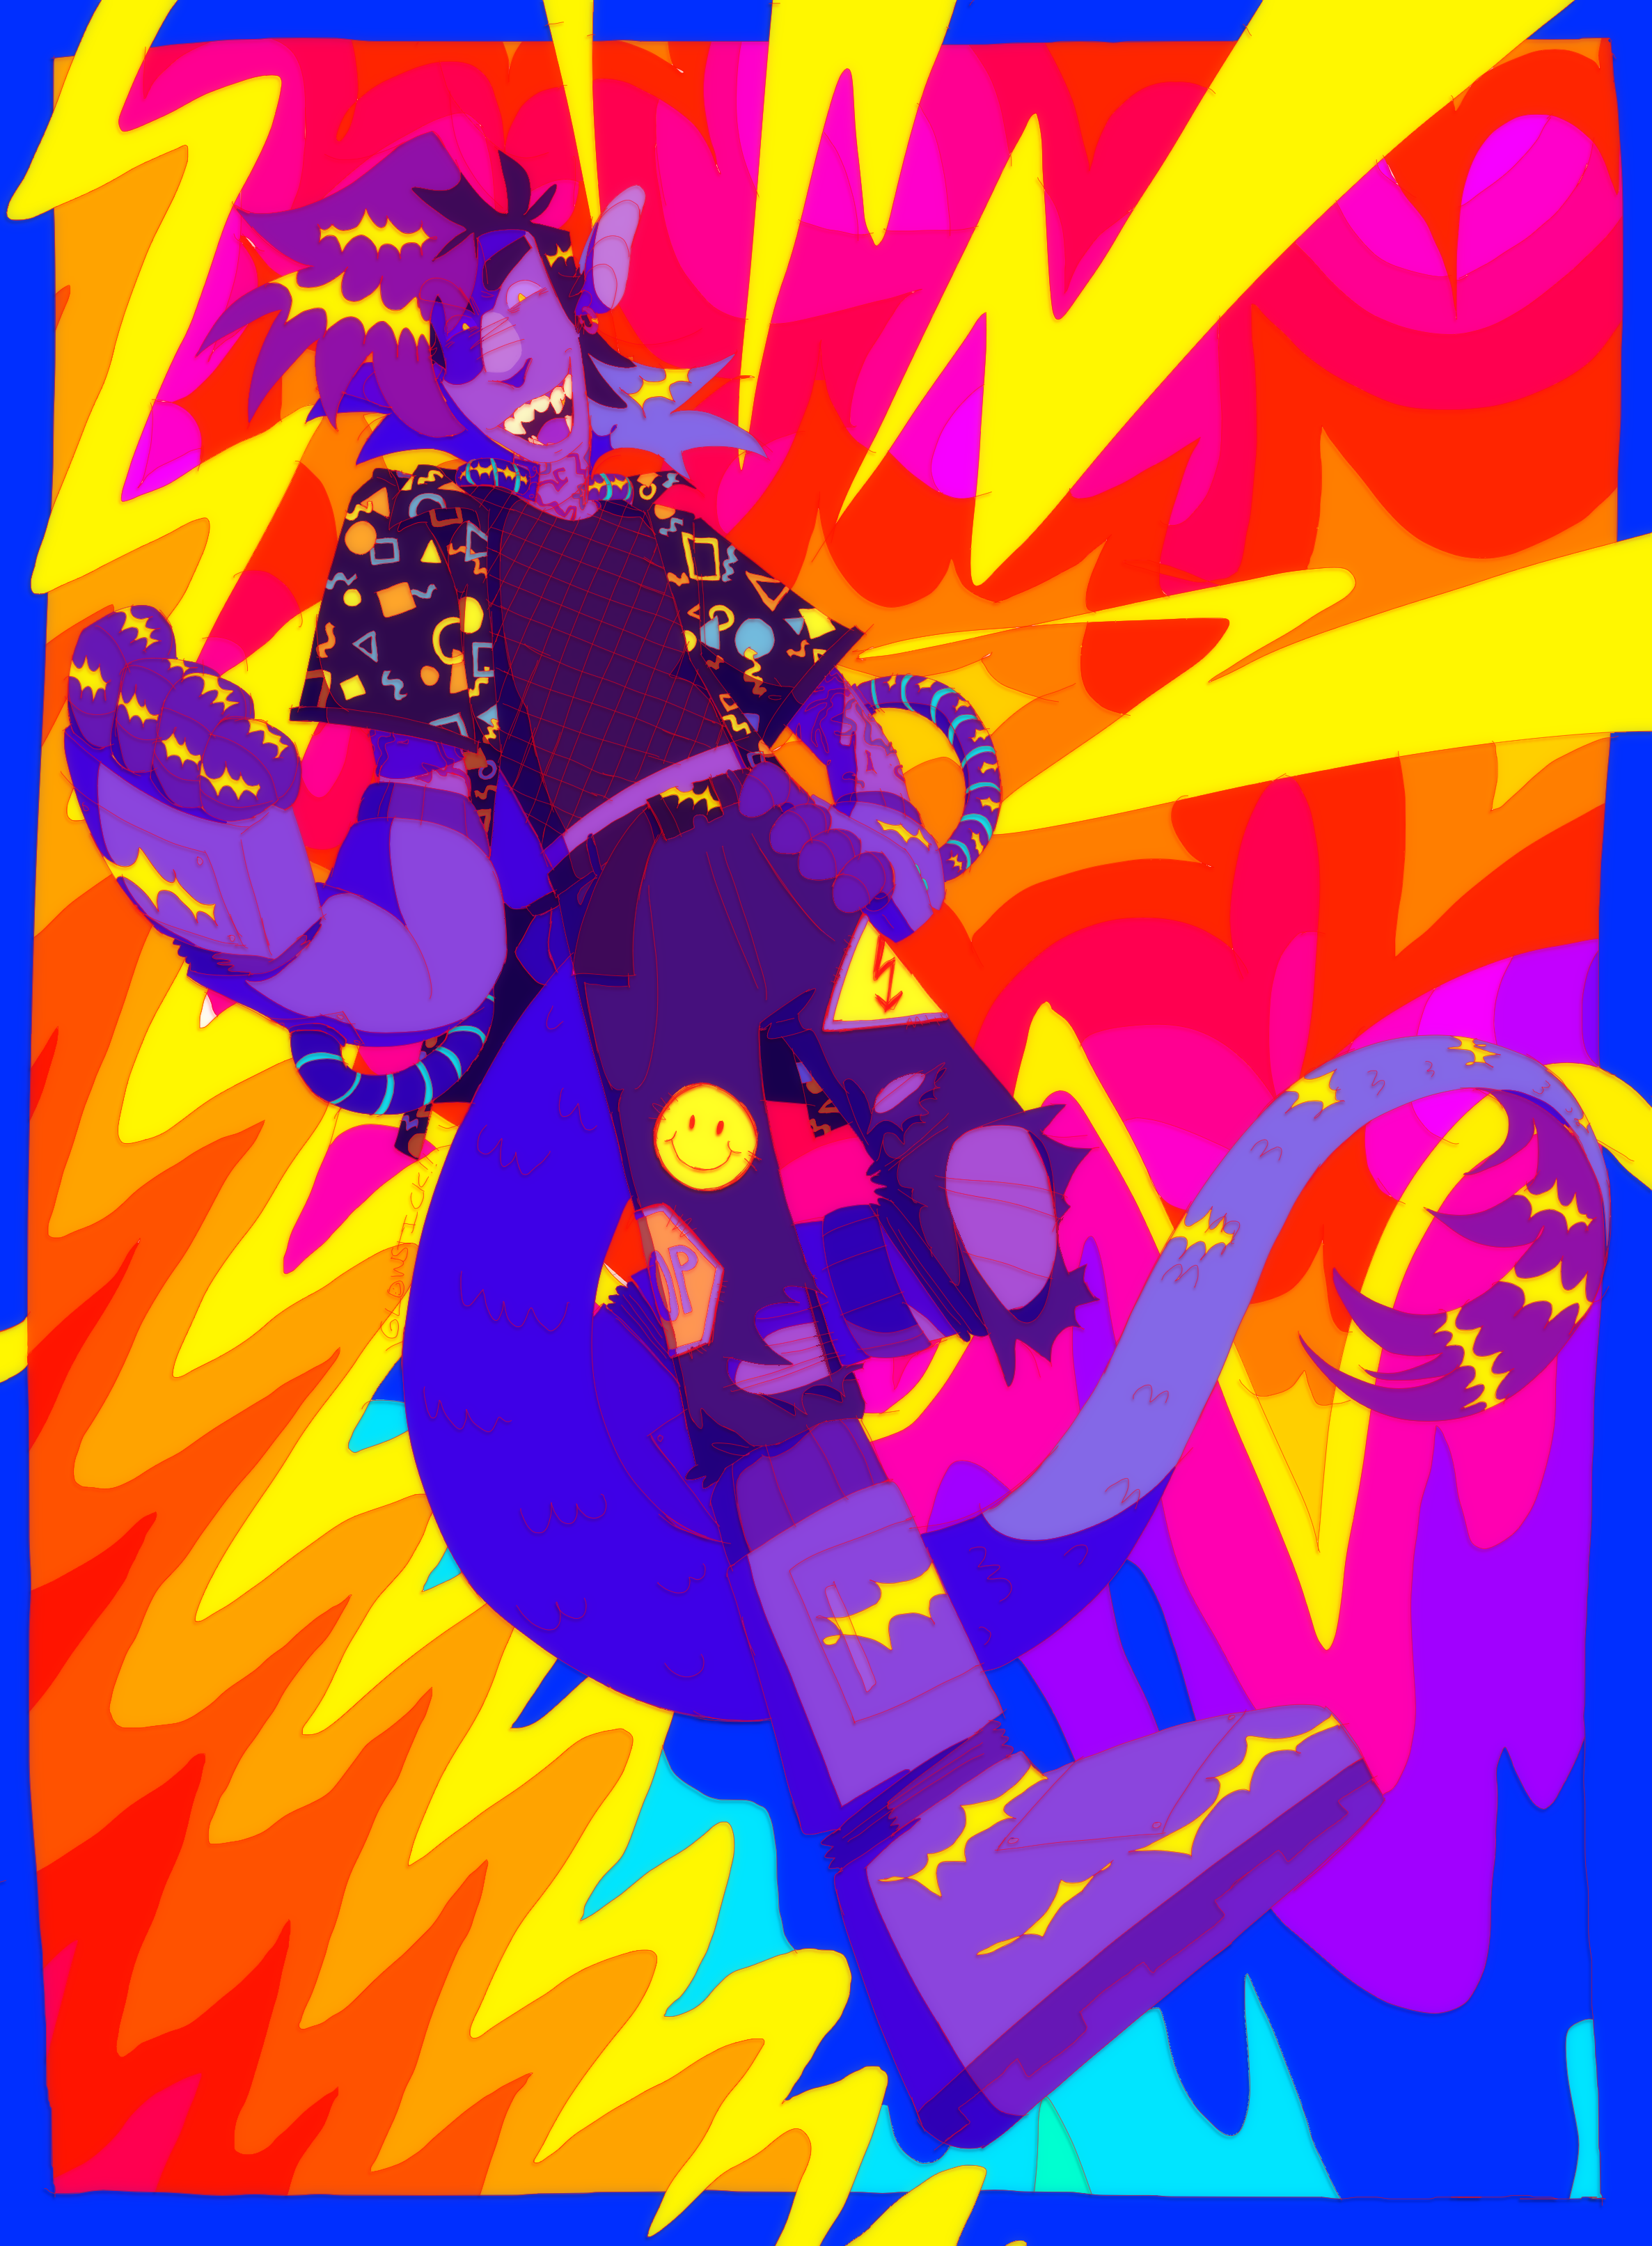 A brightly colored drawing of a cyborg character with pointy ears and a fish tail. He has robotic arms & legs, and is wearing an arcade-patterned button up, a croptop, and ripped, patch-covered jeans.